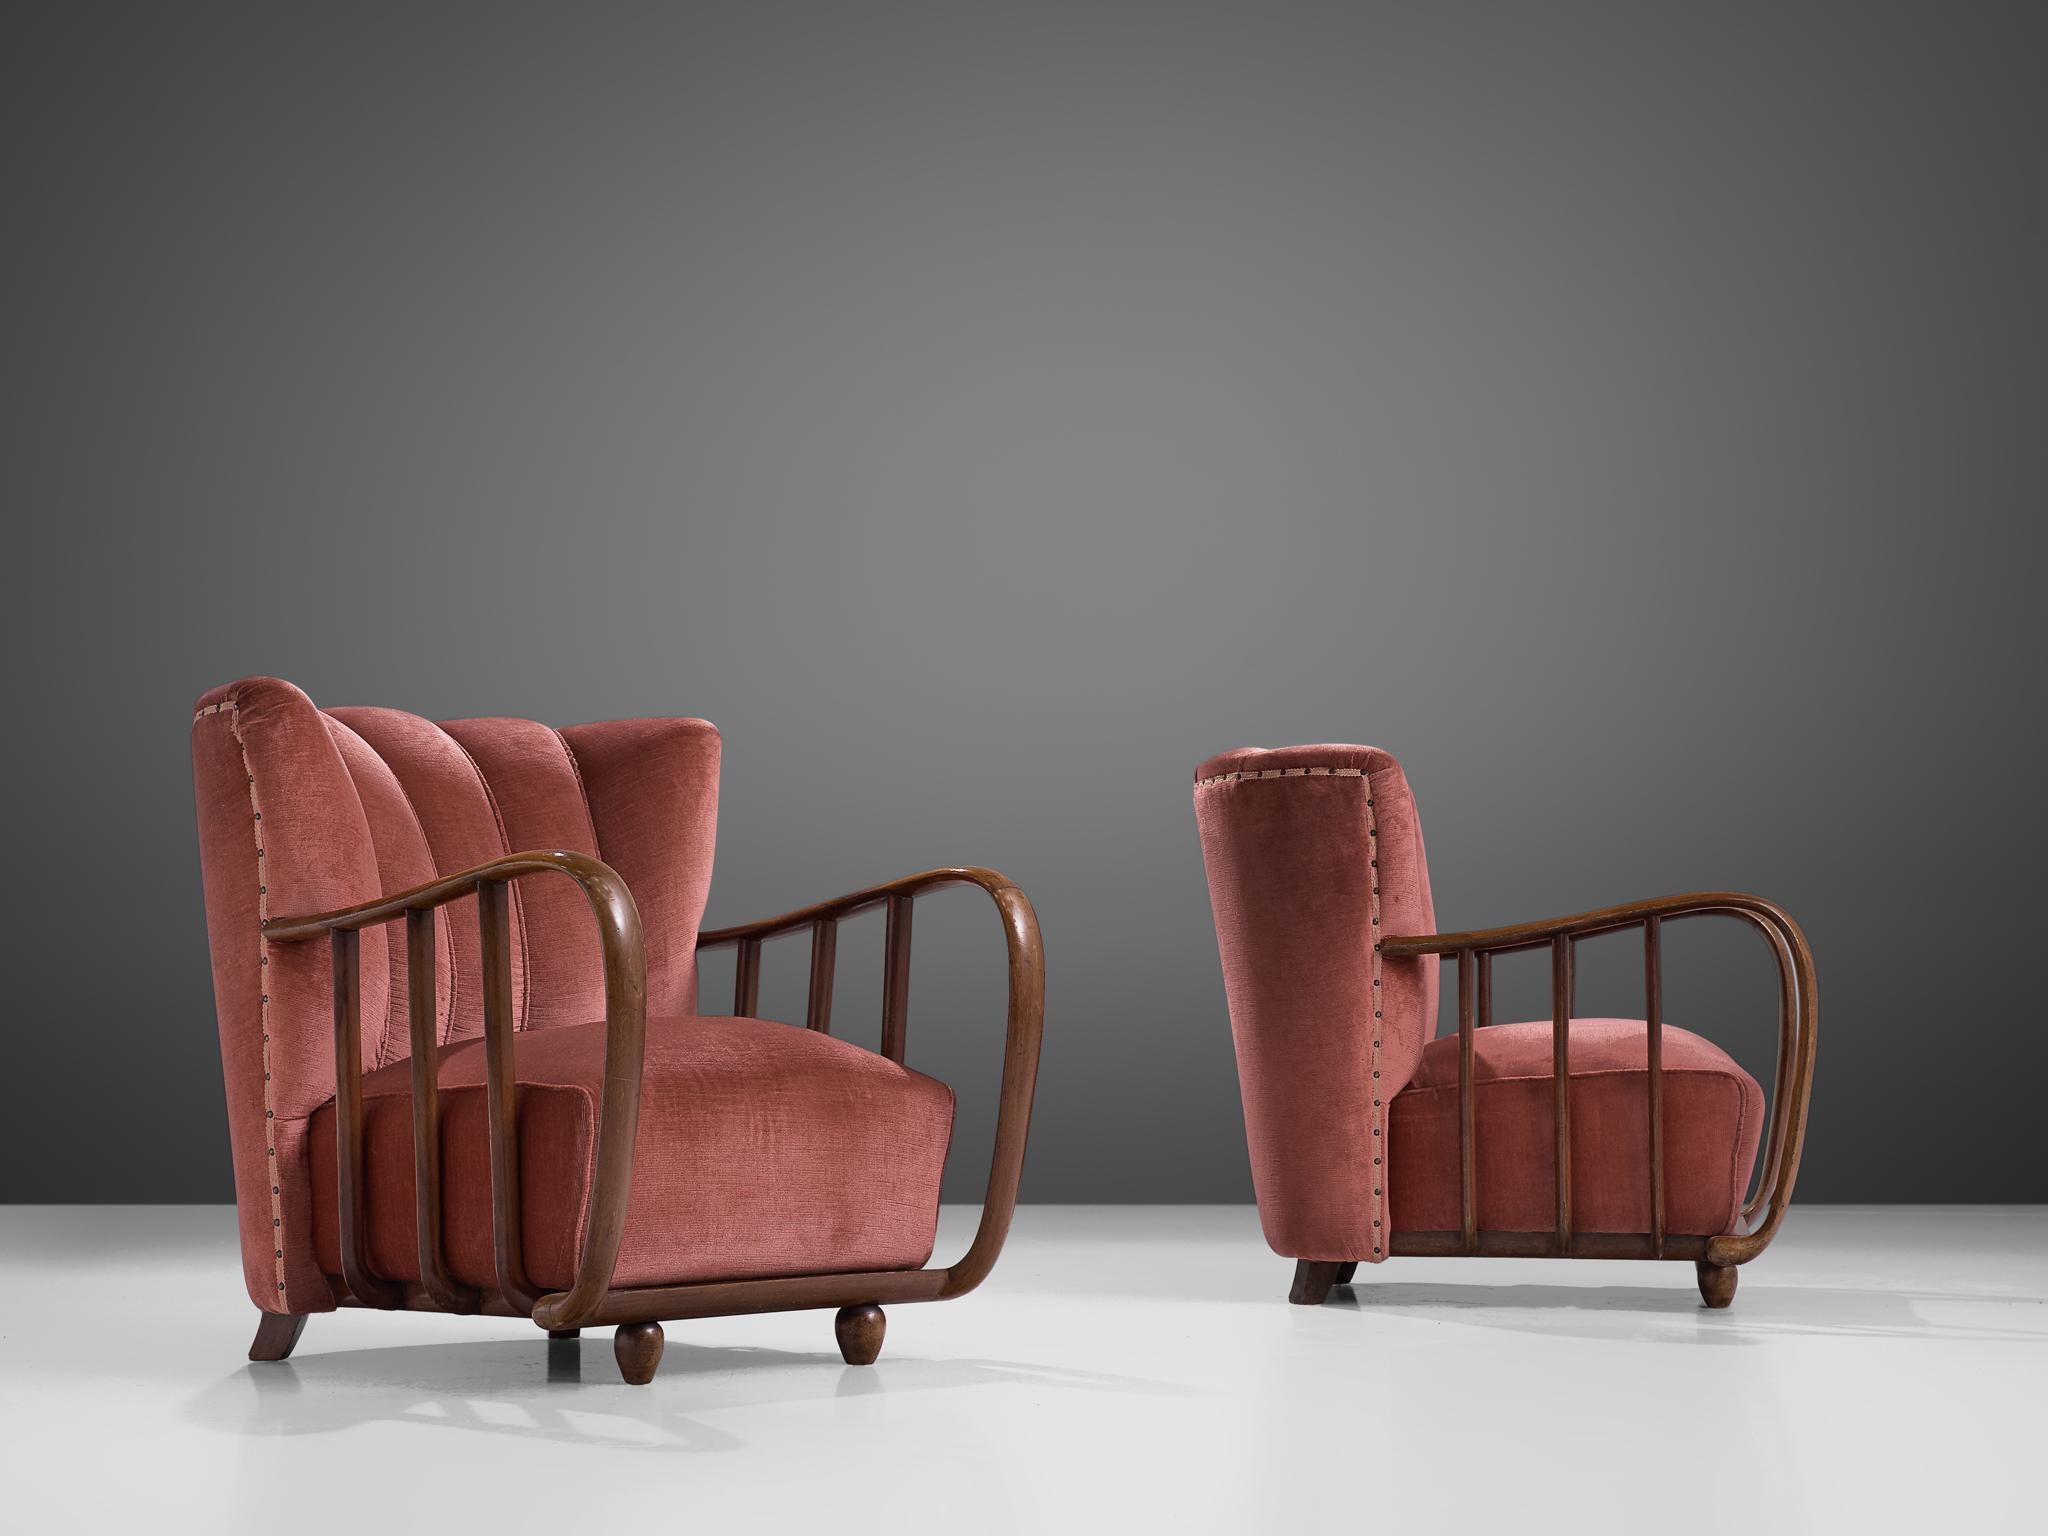 Pair of lounge chairs, beech and fabric, Italy, circa 1940s

Italian pair of armchairs with elegant, rounded shaped frames that feature sculpted details. For instance, the curved wooden detail of the armrests that flows over to the base. Also the